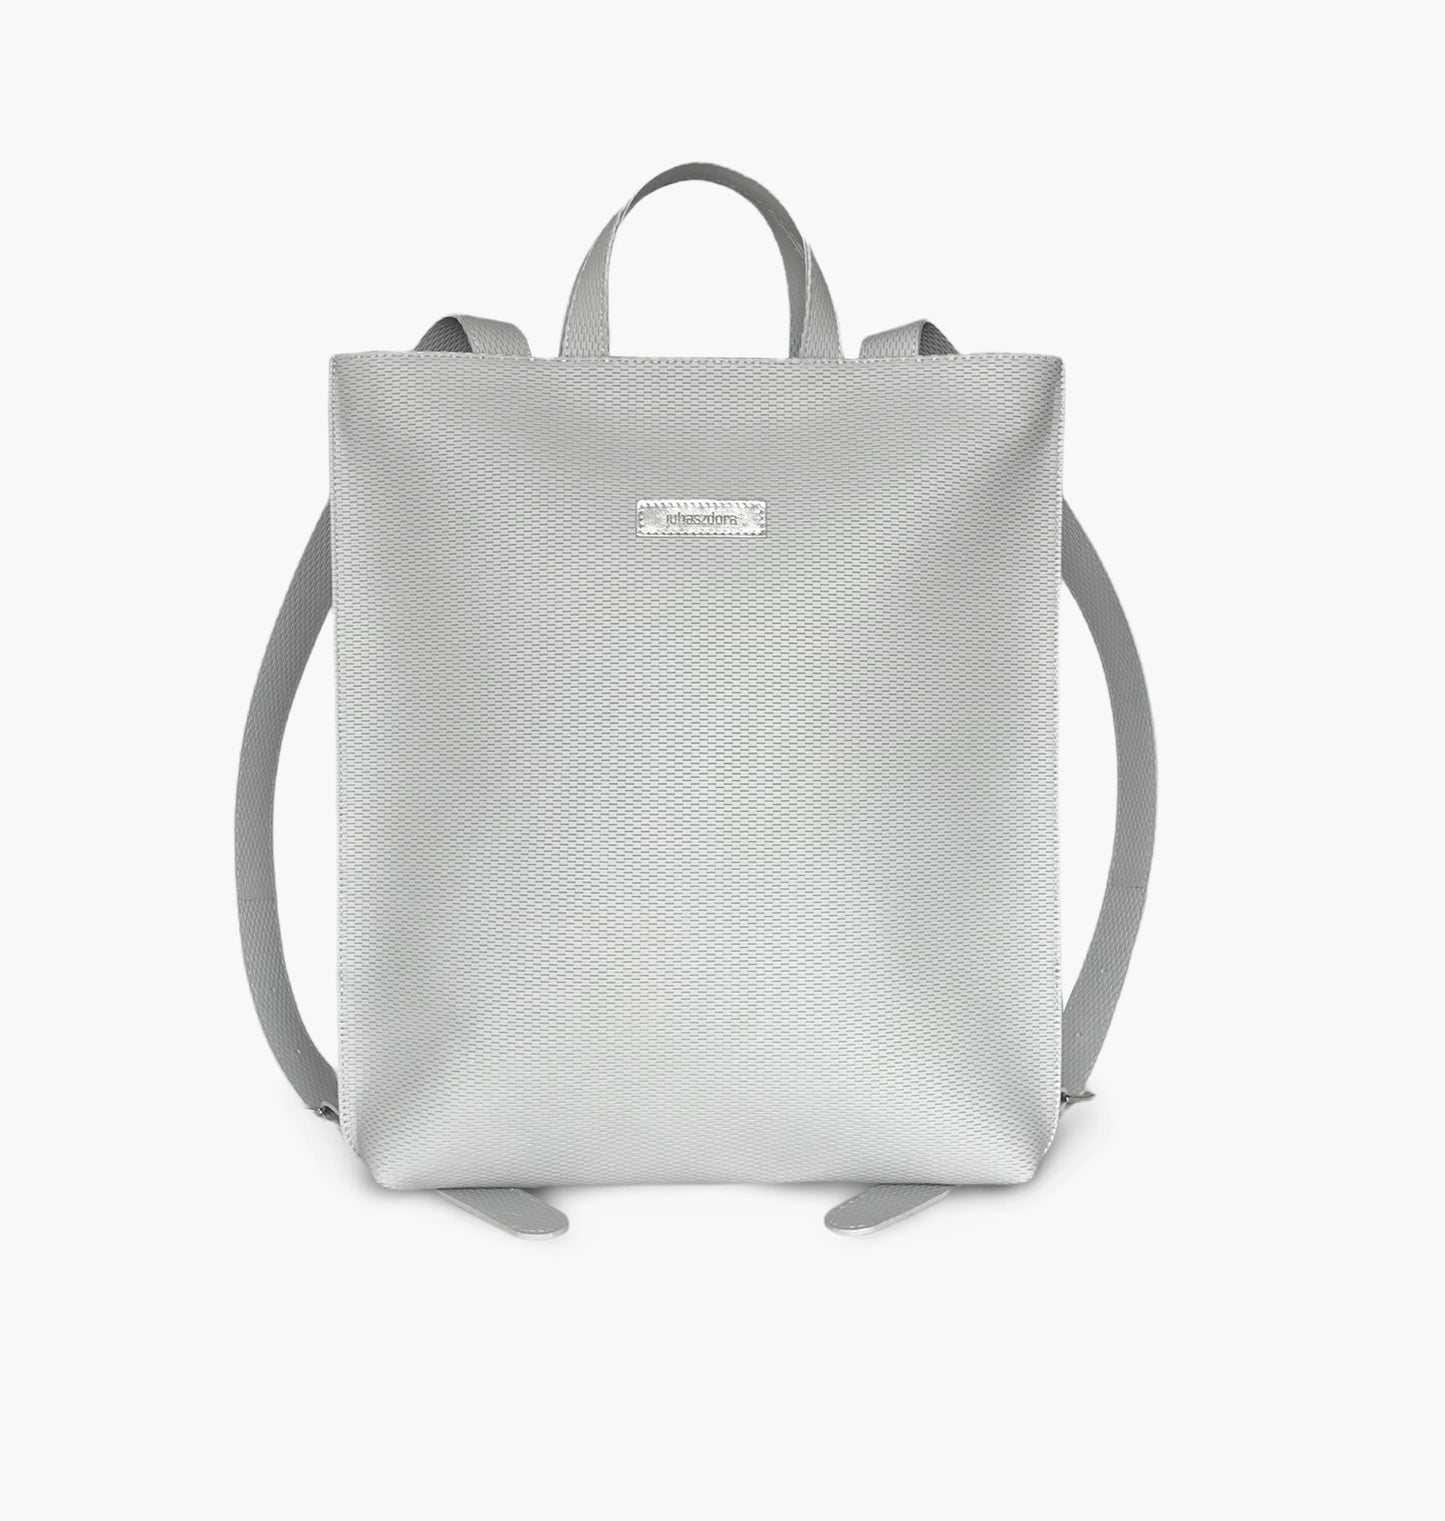 Réka backpack - gray with patterned surface